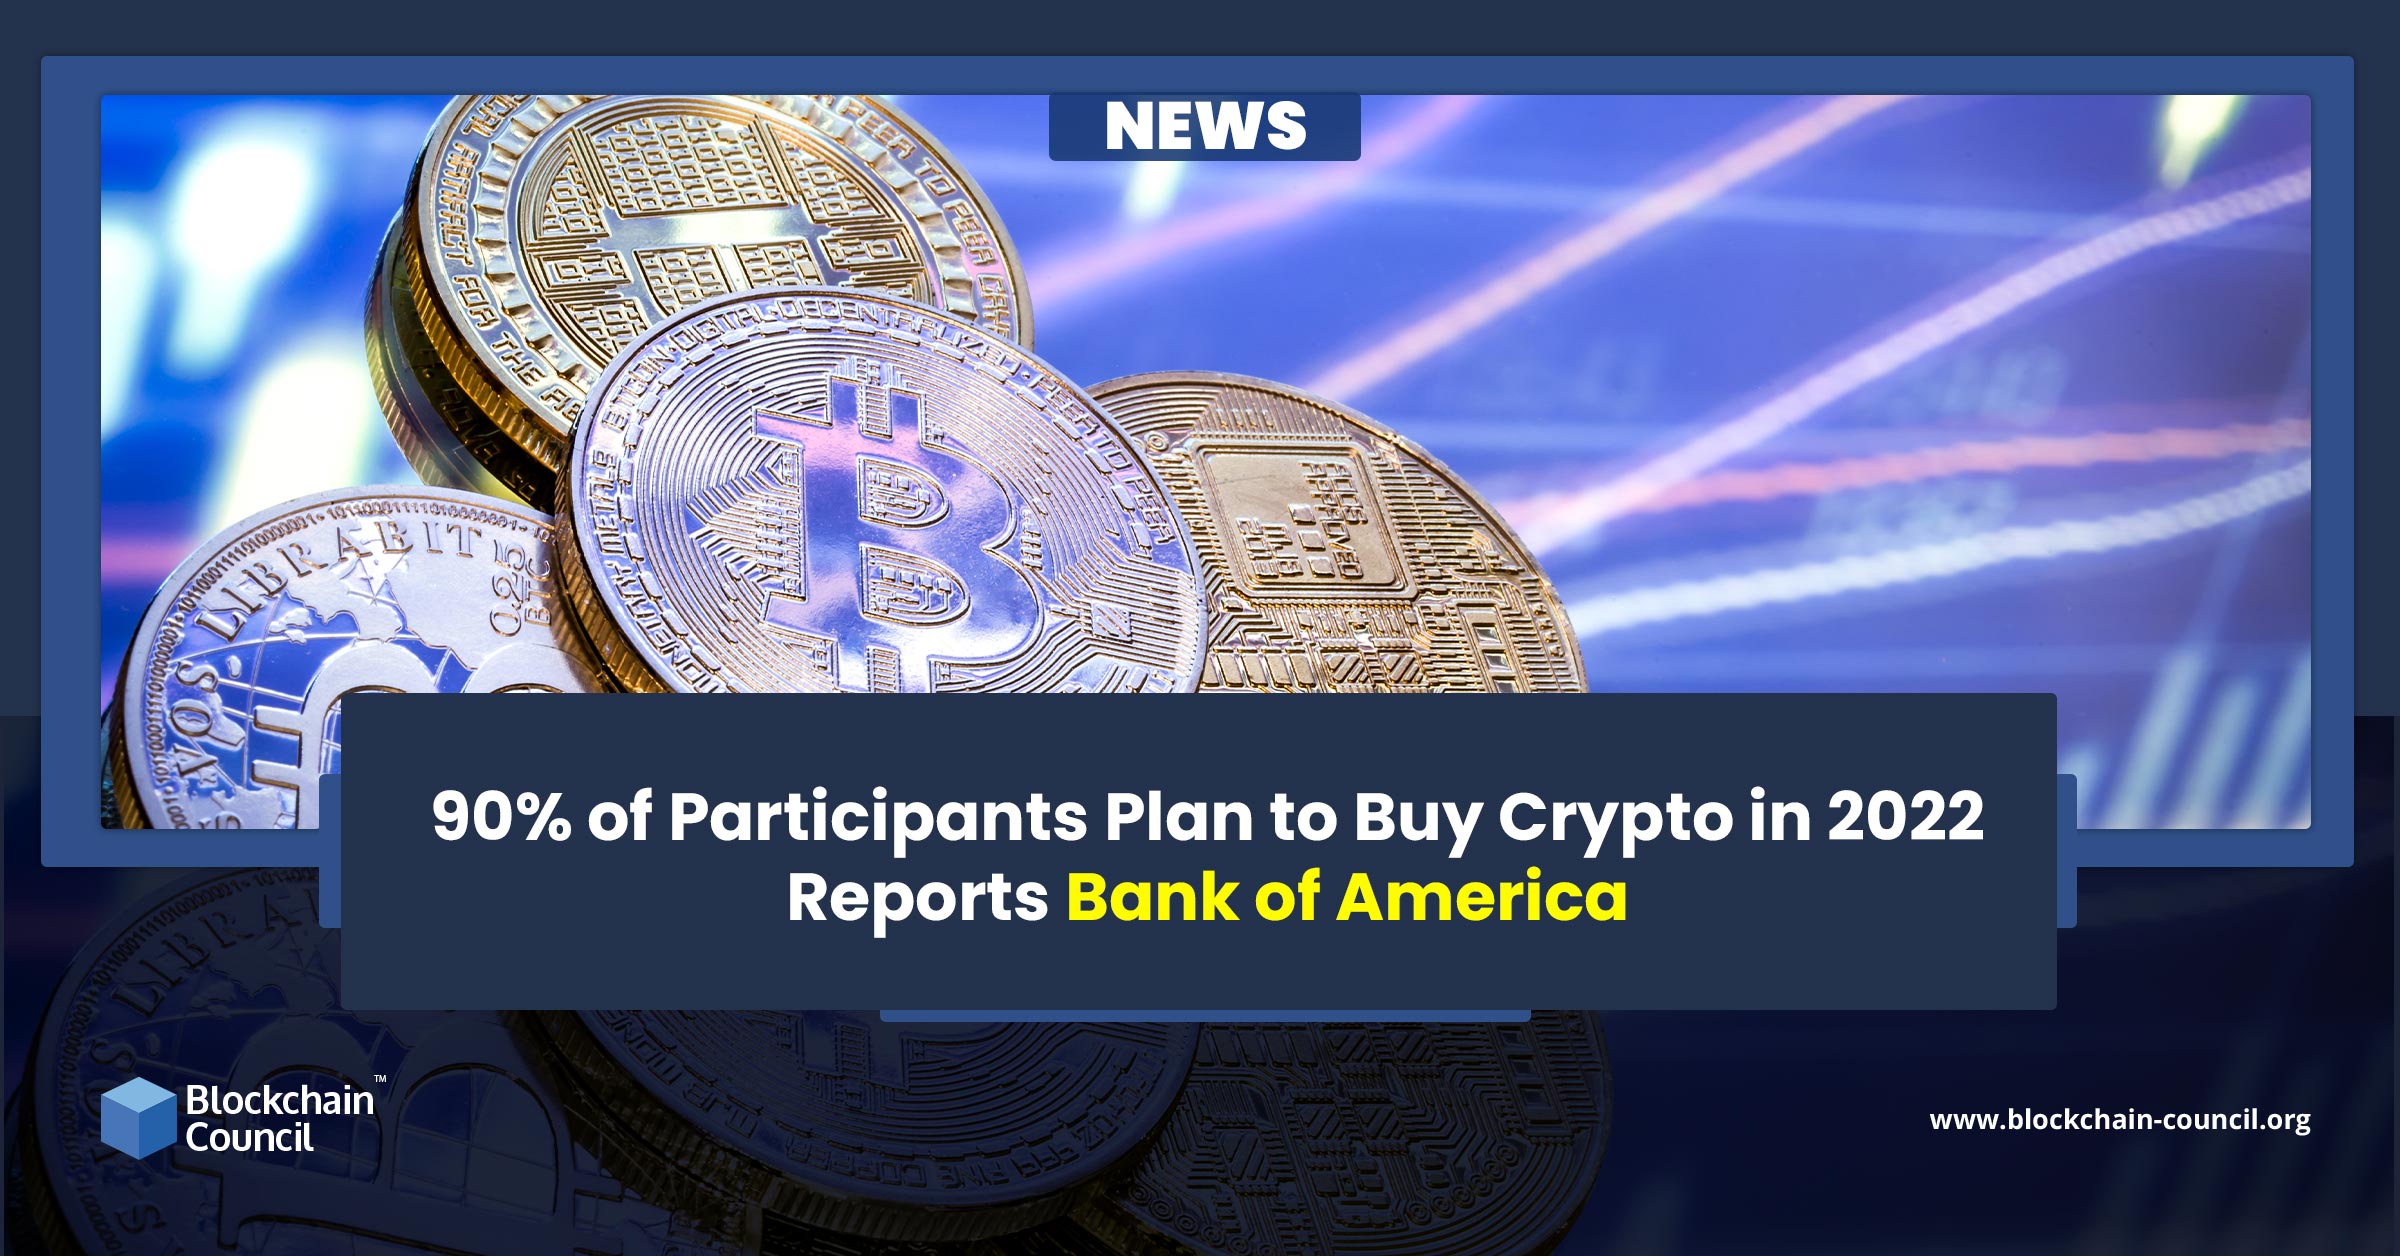 90% of Participants Plan to Buy Crypto in 2022 Reports Bank of America